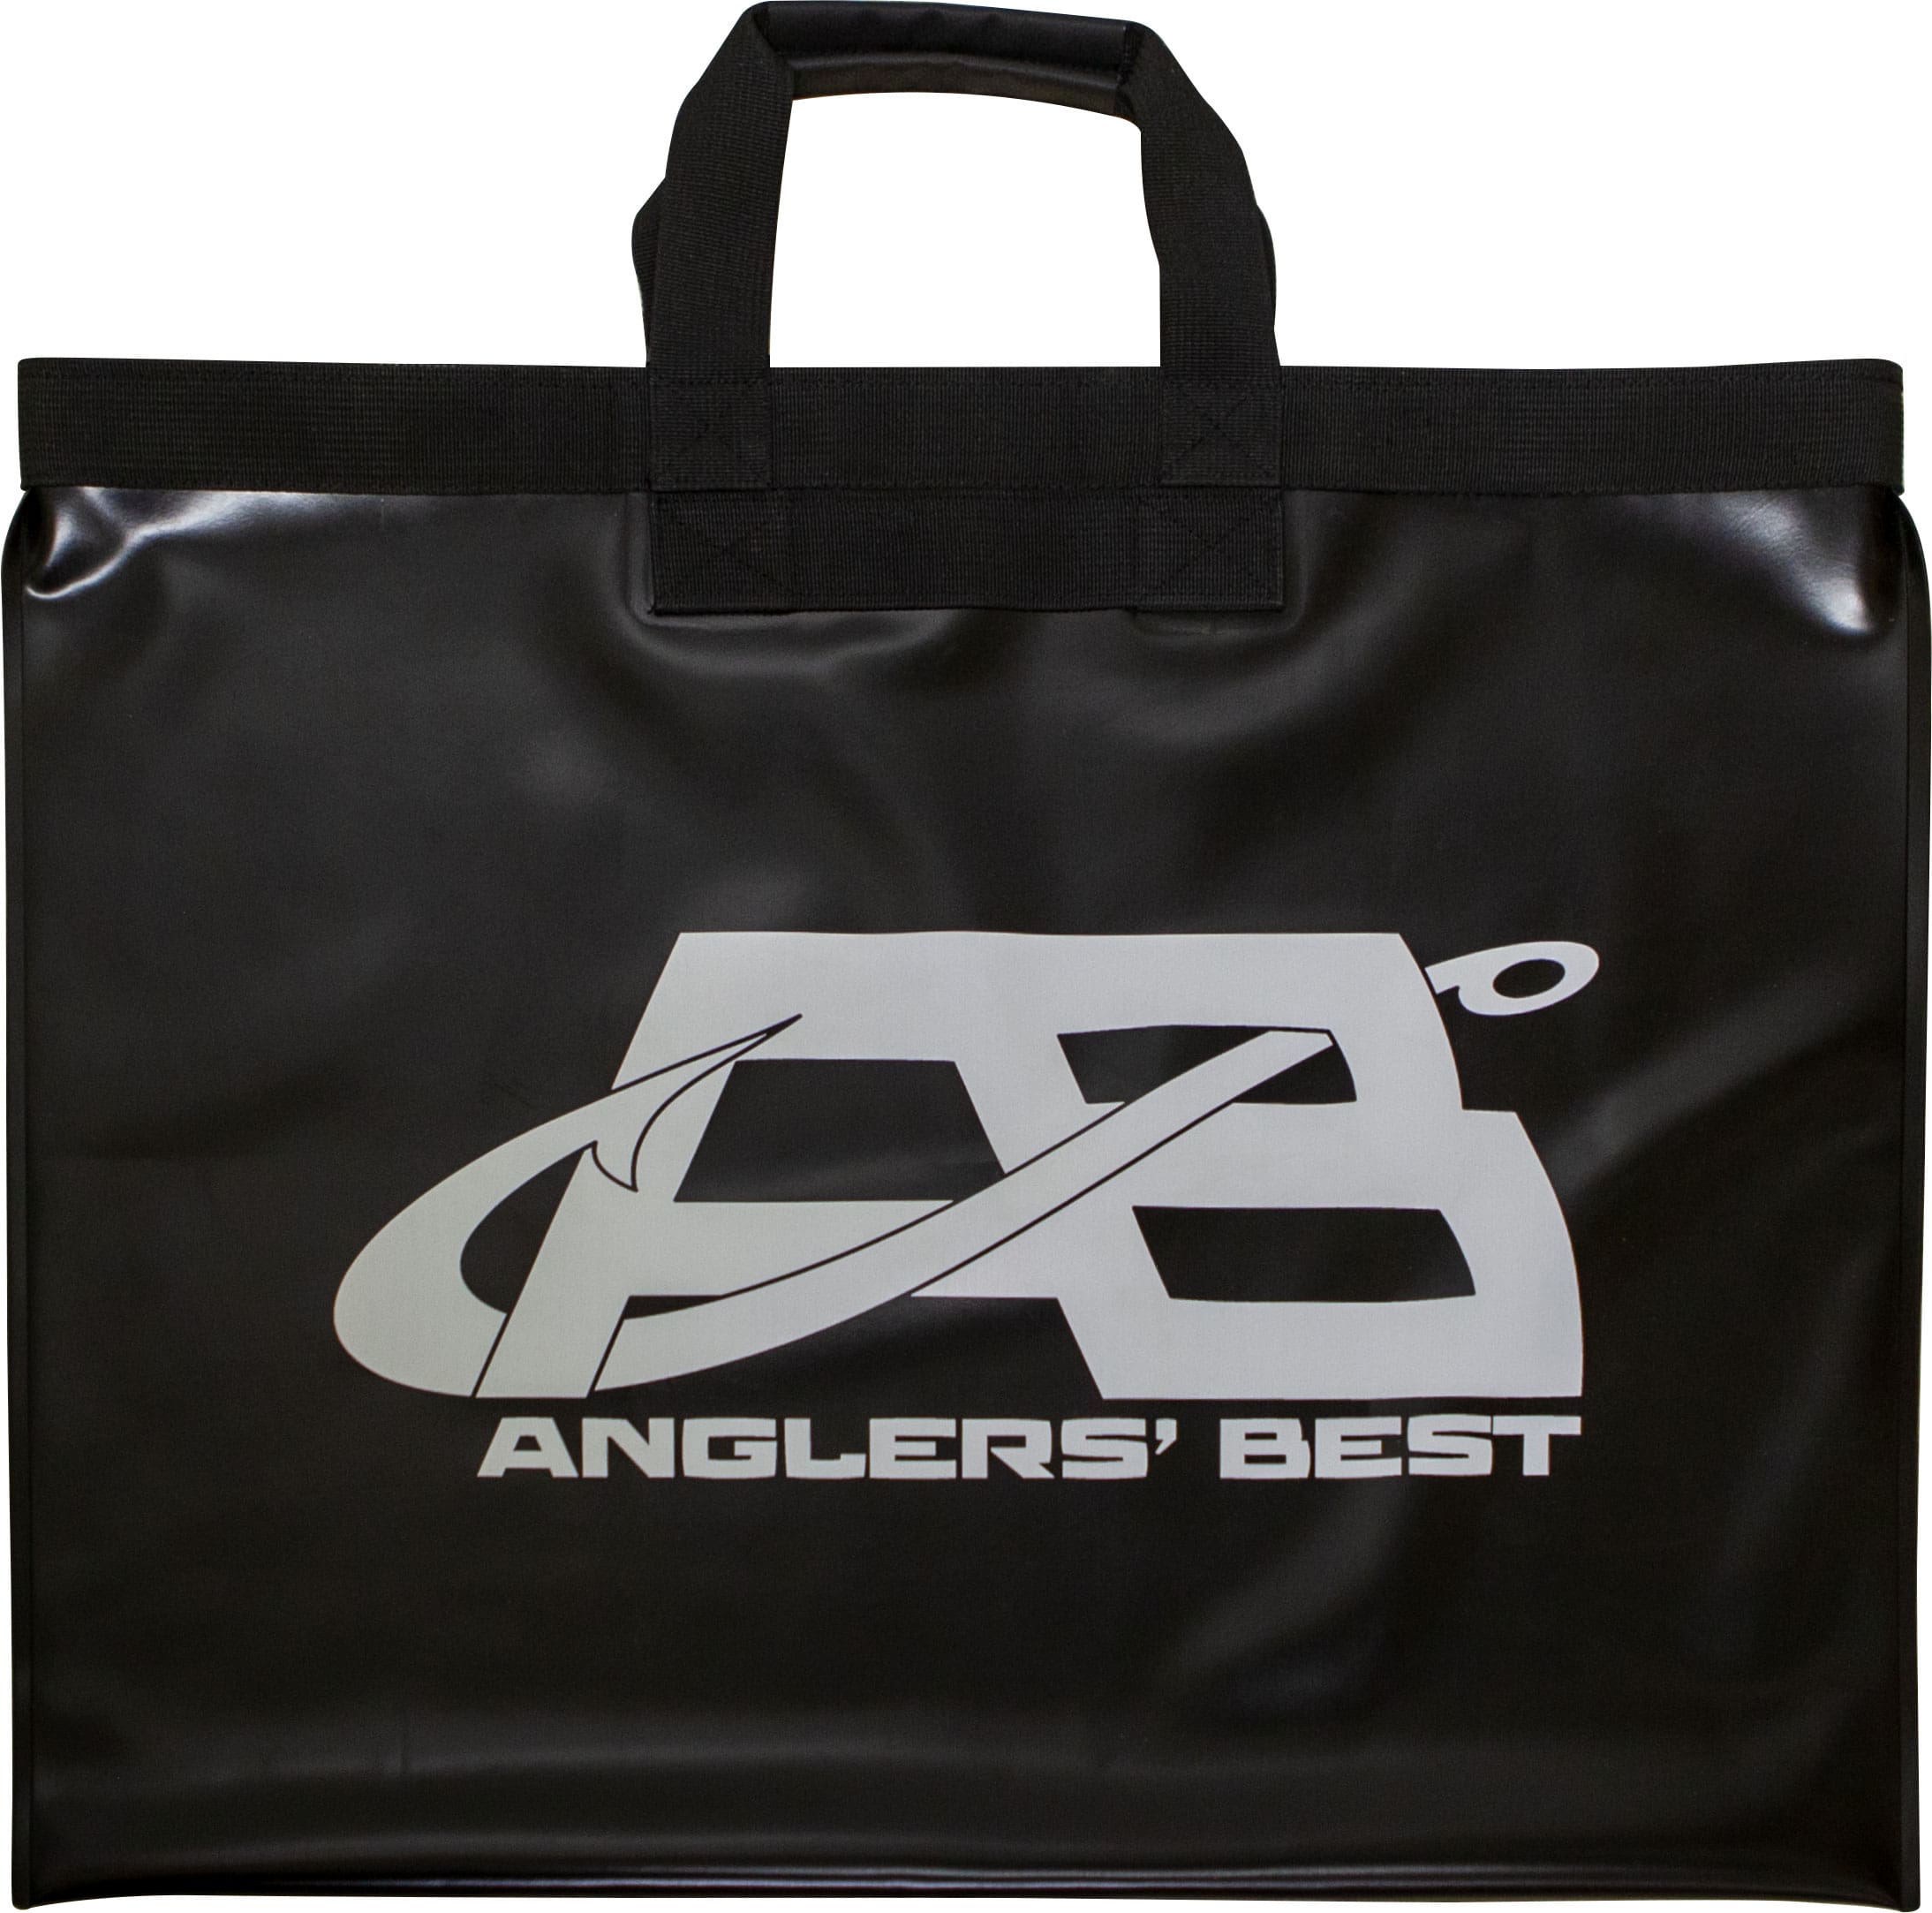 24x25in-fish-tournament-weigh-in-bag-with-removable-mesh-insert-fish-bag-buffalo-gear-613682_620x.jpg?v=1706585068